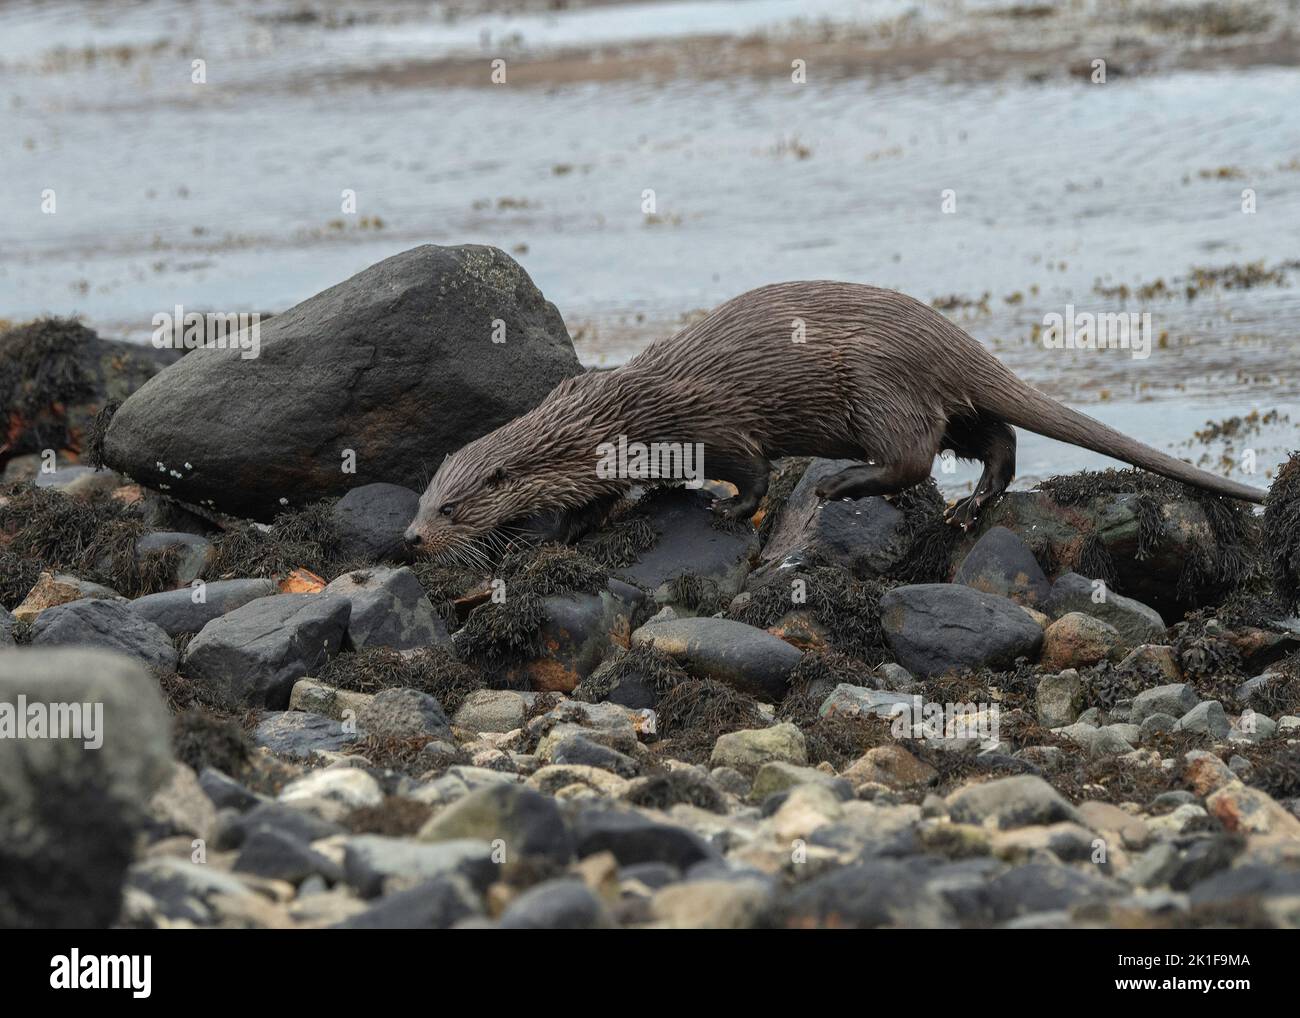 Otter (Lutra lutra) in the shallows on edge of Loch Spelve, Isle of Mull. Inner Hebrides, Scotland Stock Photo